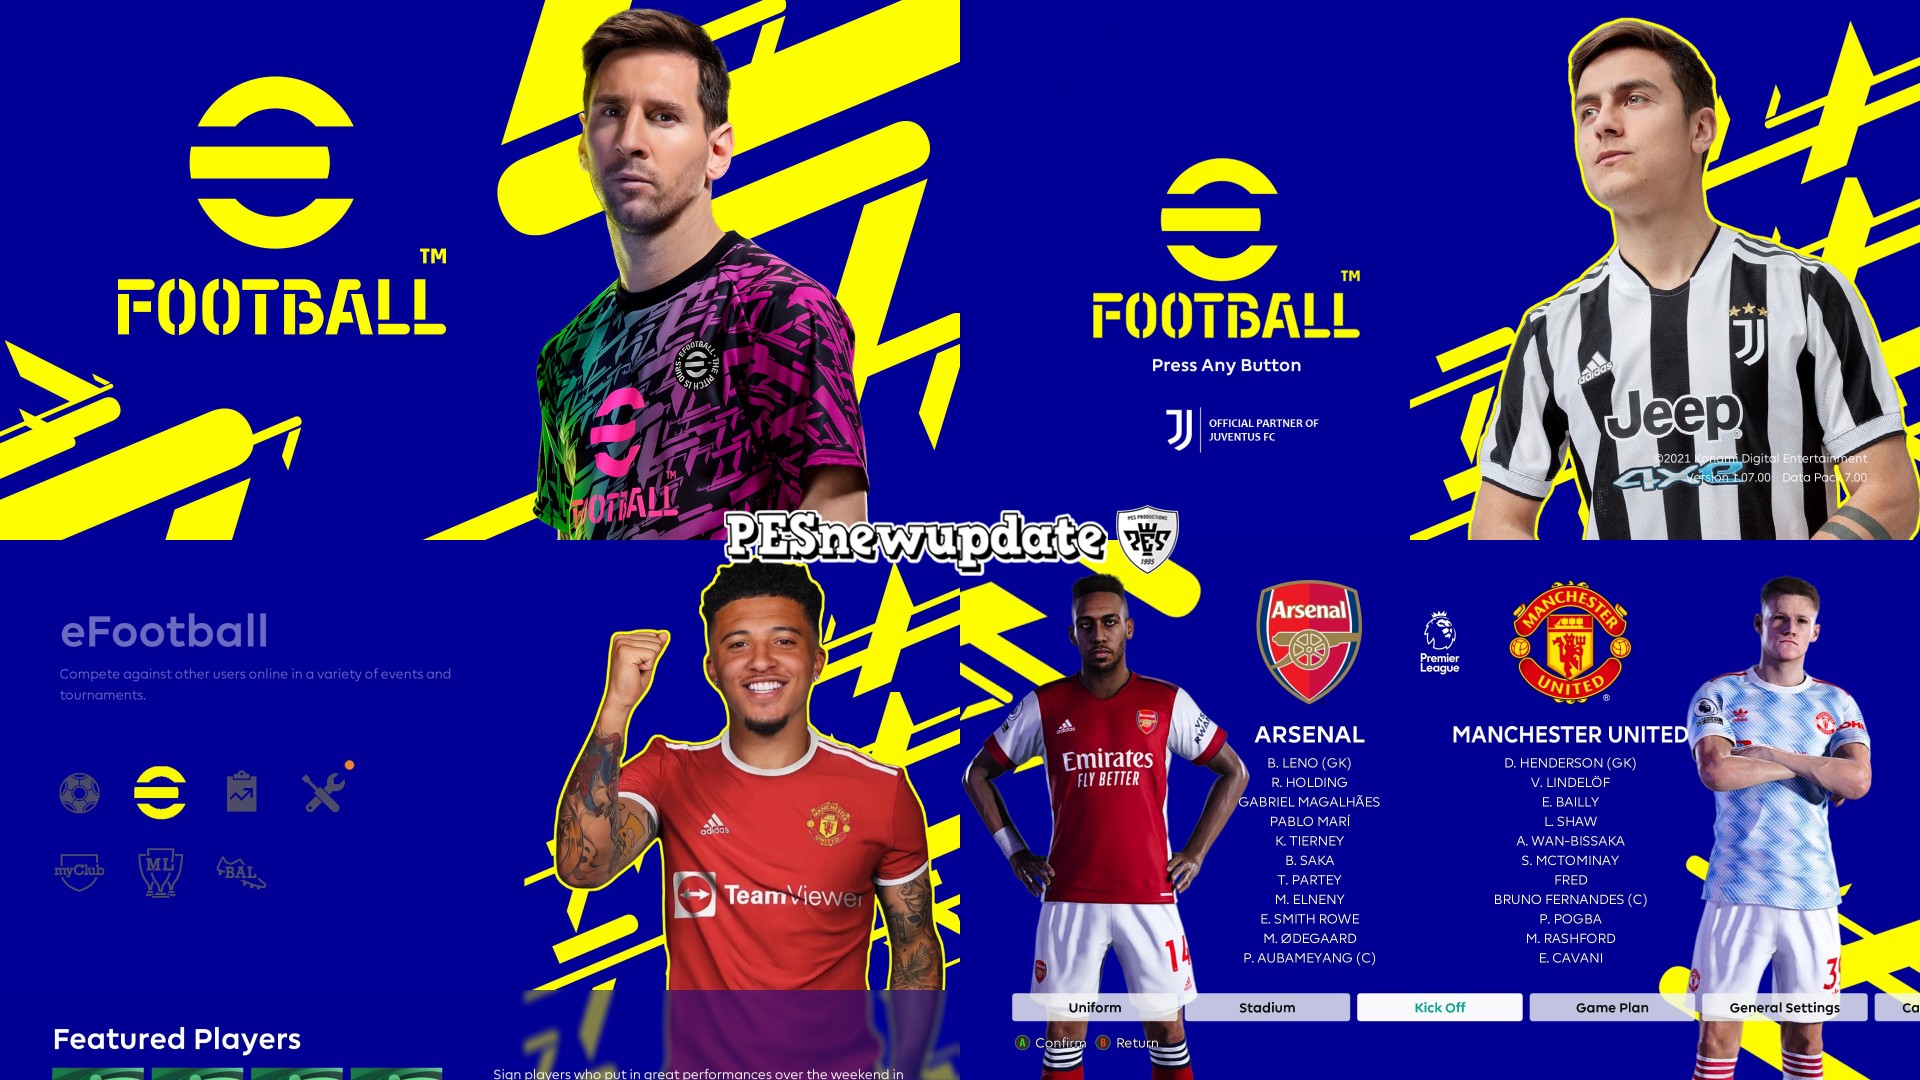 PES 2021 Menu Mod eFootball by PESNewupdate PESNewupdate.com. Free Download Latest Pro Evolution Soccer Patch & Updates